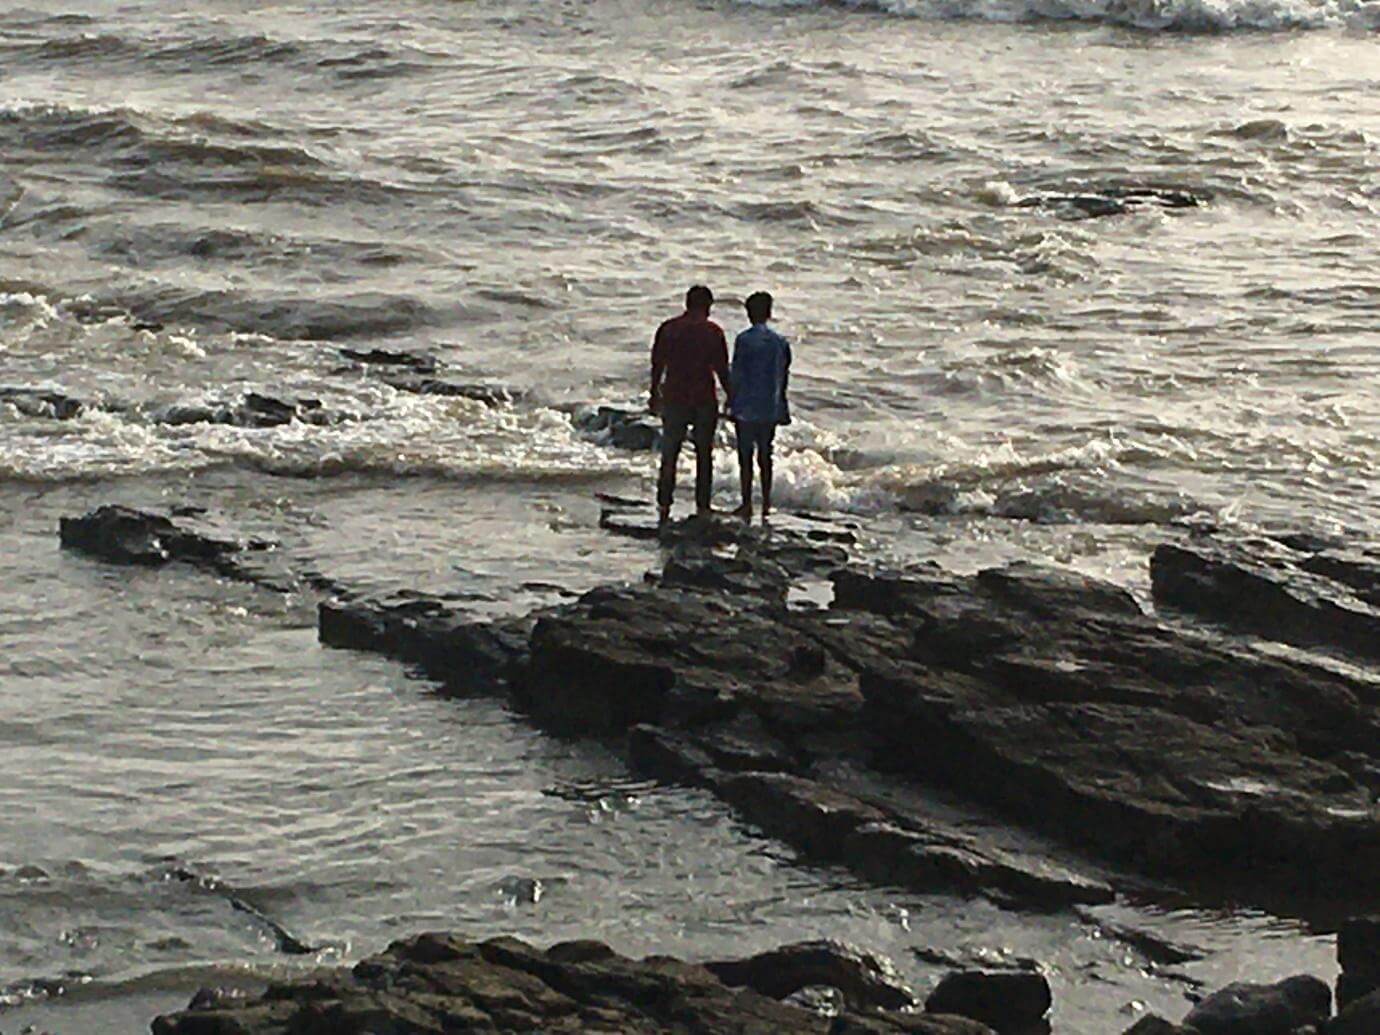 Two men stand hand-in-hand, at the edge of the rocks near Bandra Fort.